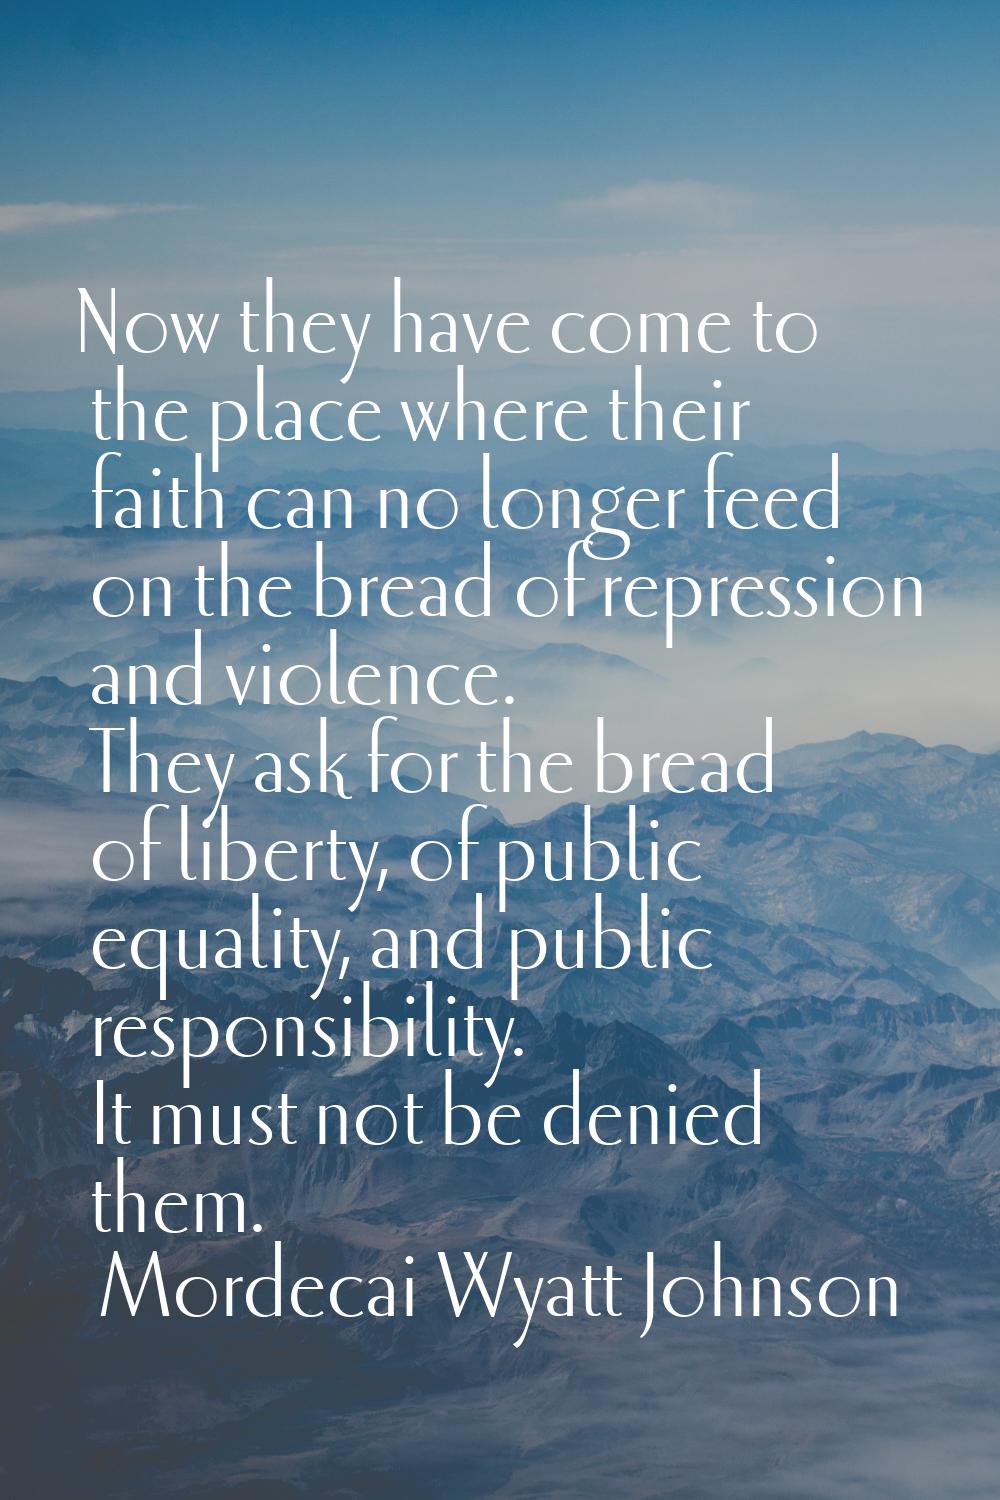 Now they have come to the place where their faith can no longer feed on the bread of repression and